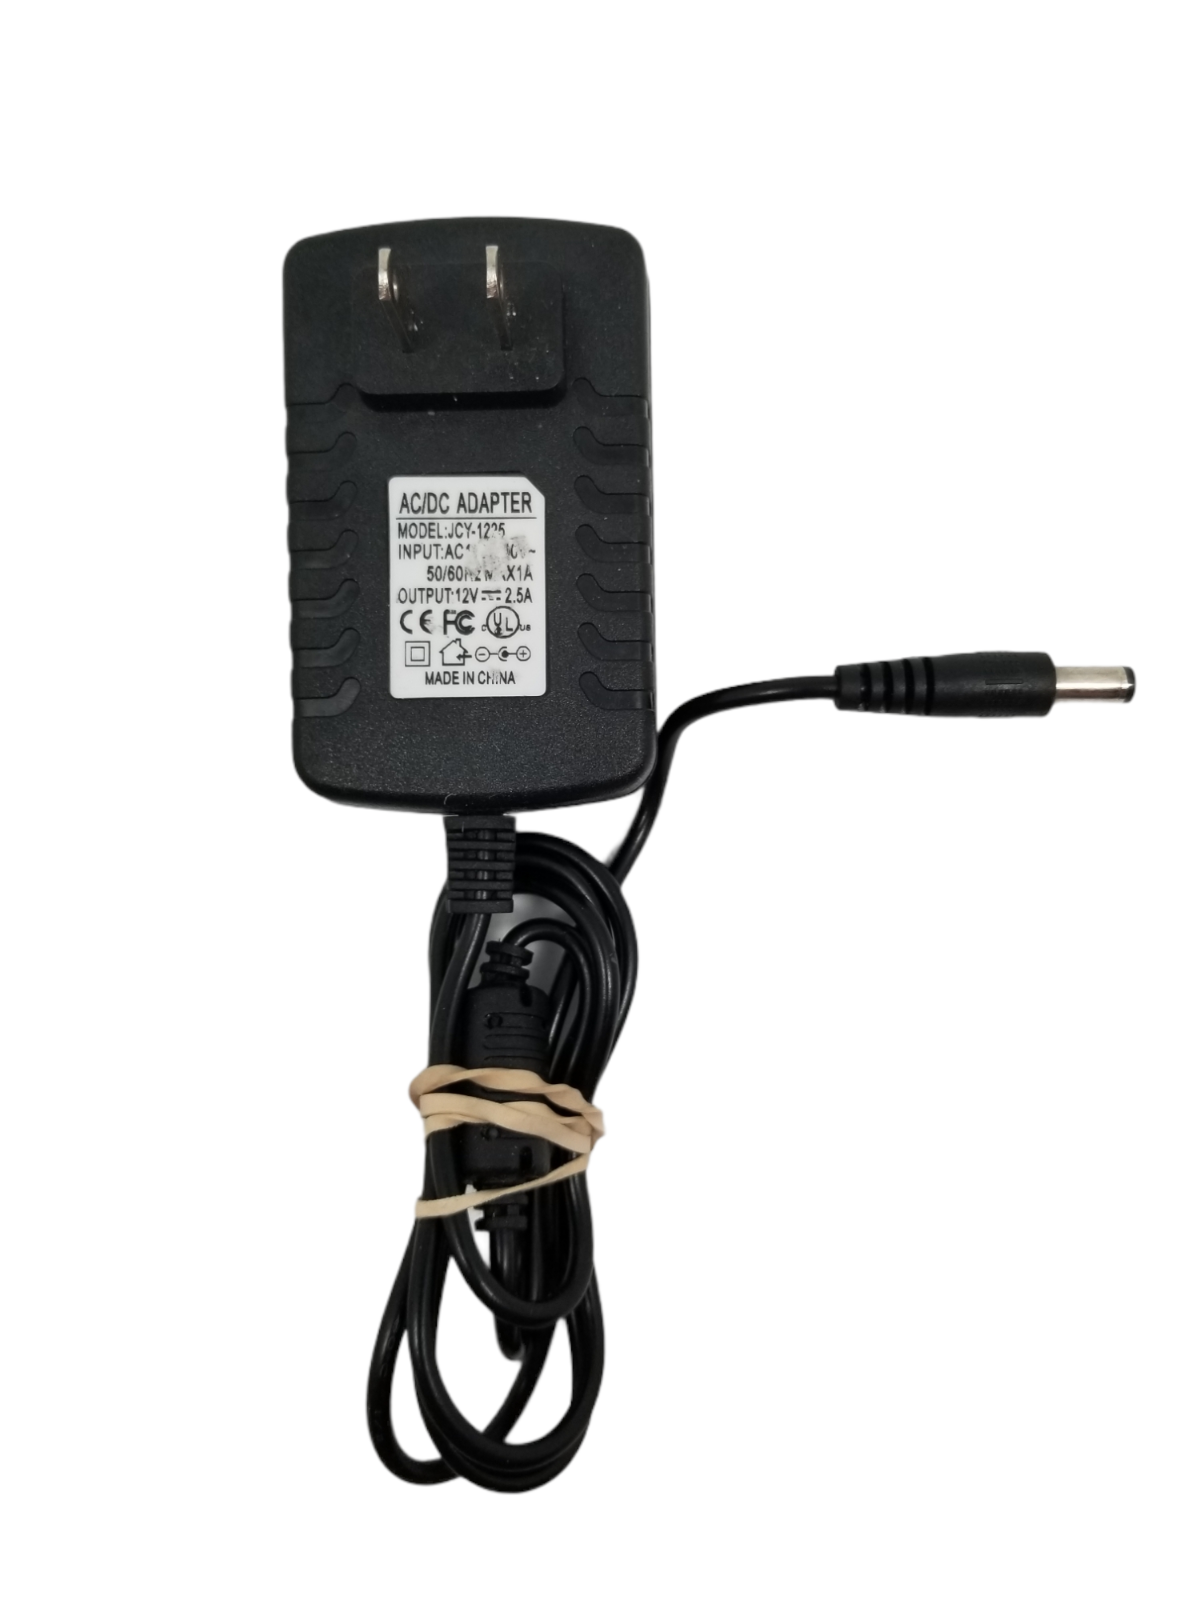 AC Adapter For Tascam PS-1225 PS-1225L Charger Power Supply PSU 12V 2.5A Mains Country/Region of Manufacture: United